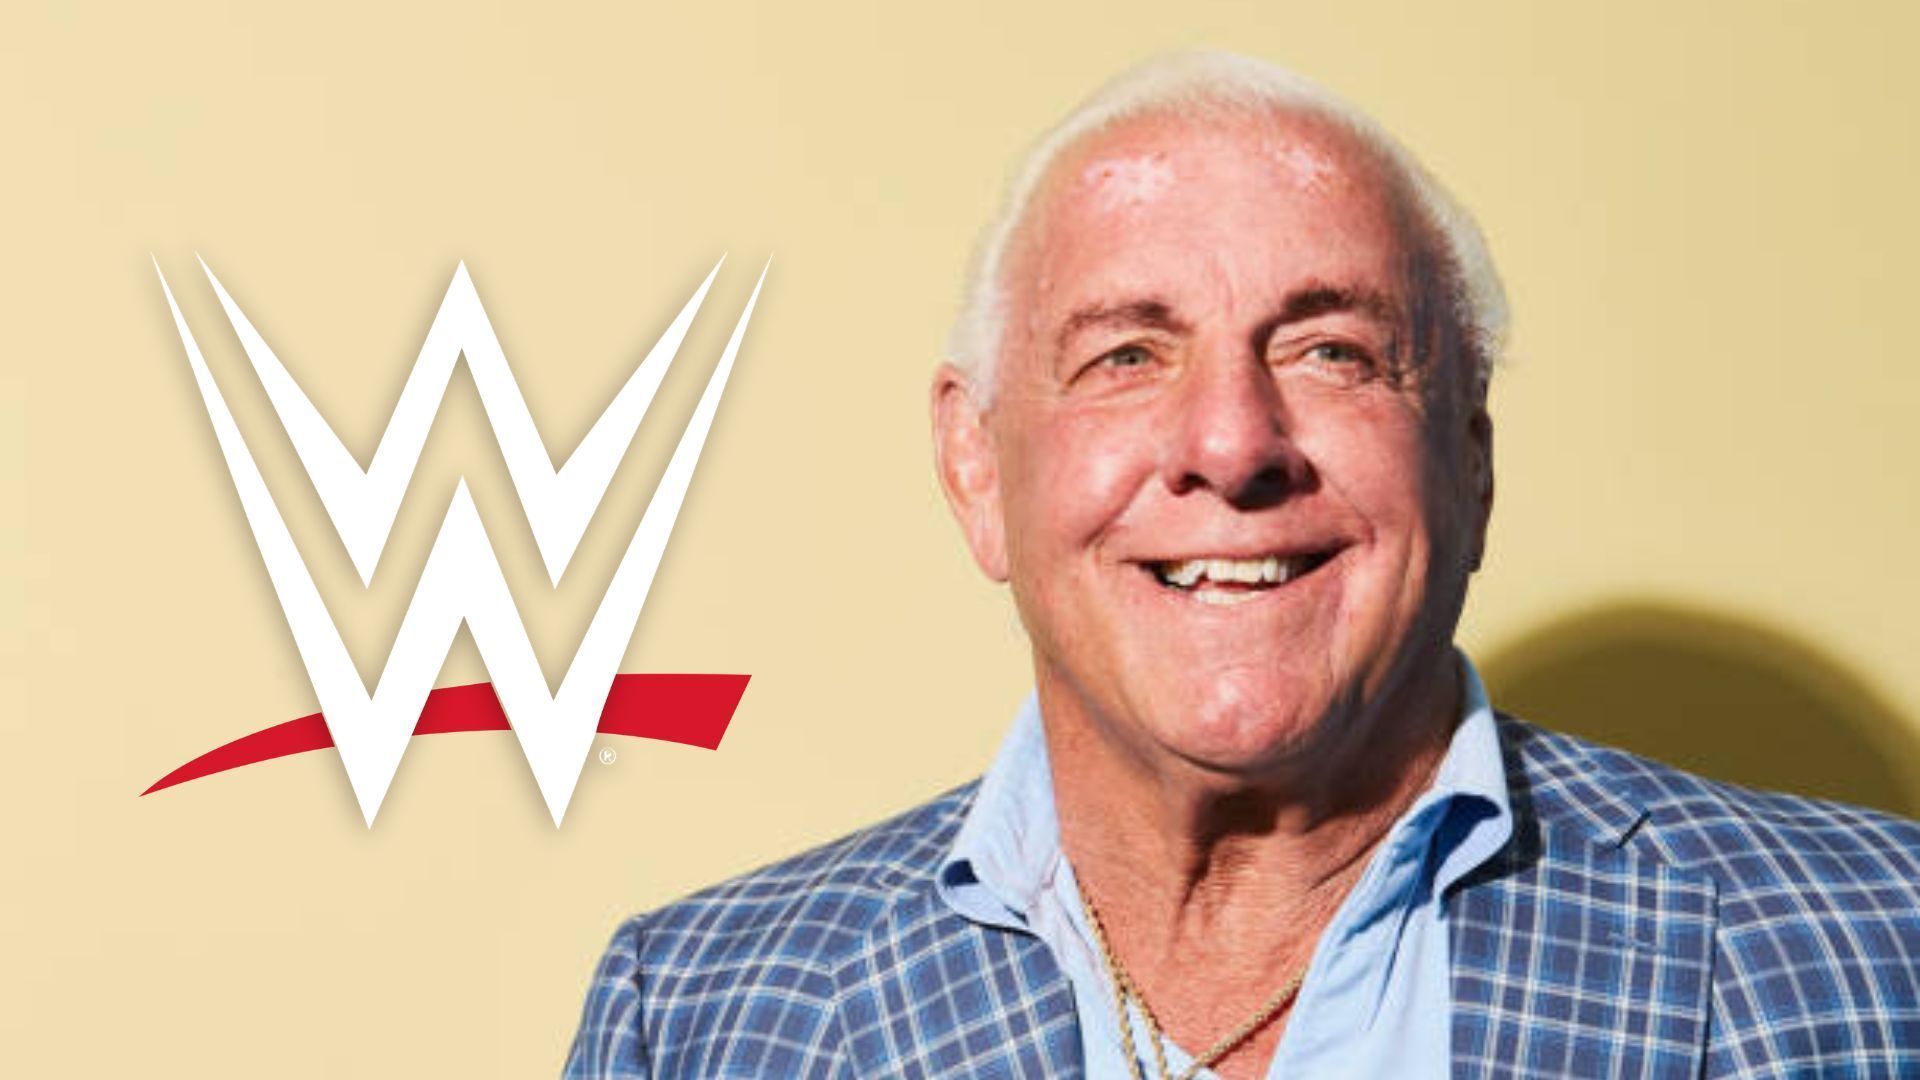 Ric Flair is one of the most successful professional wrestlers of all time.